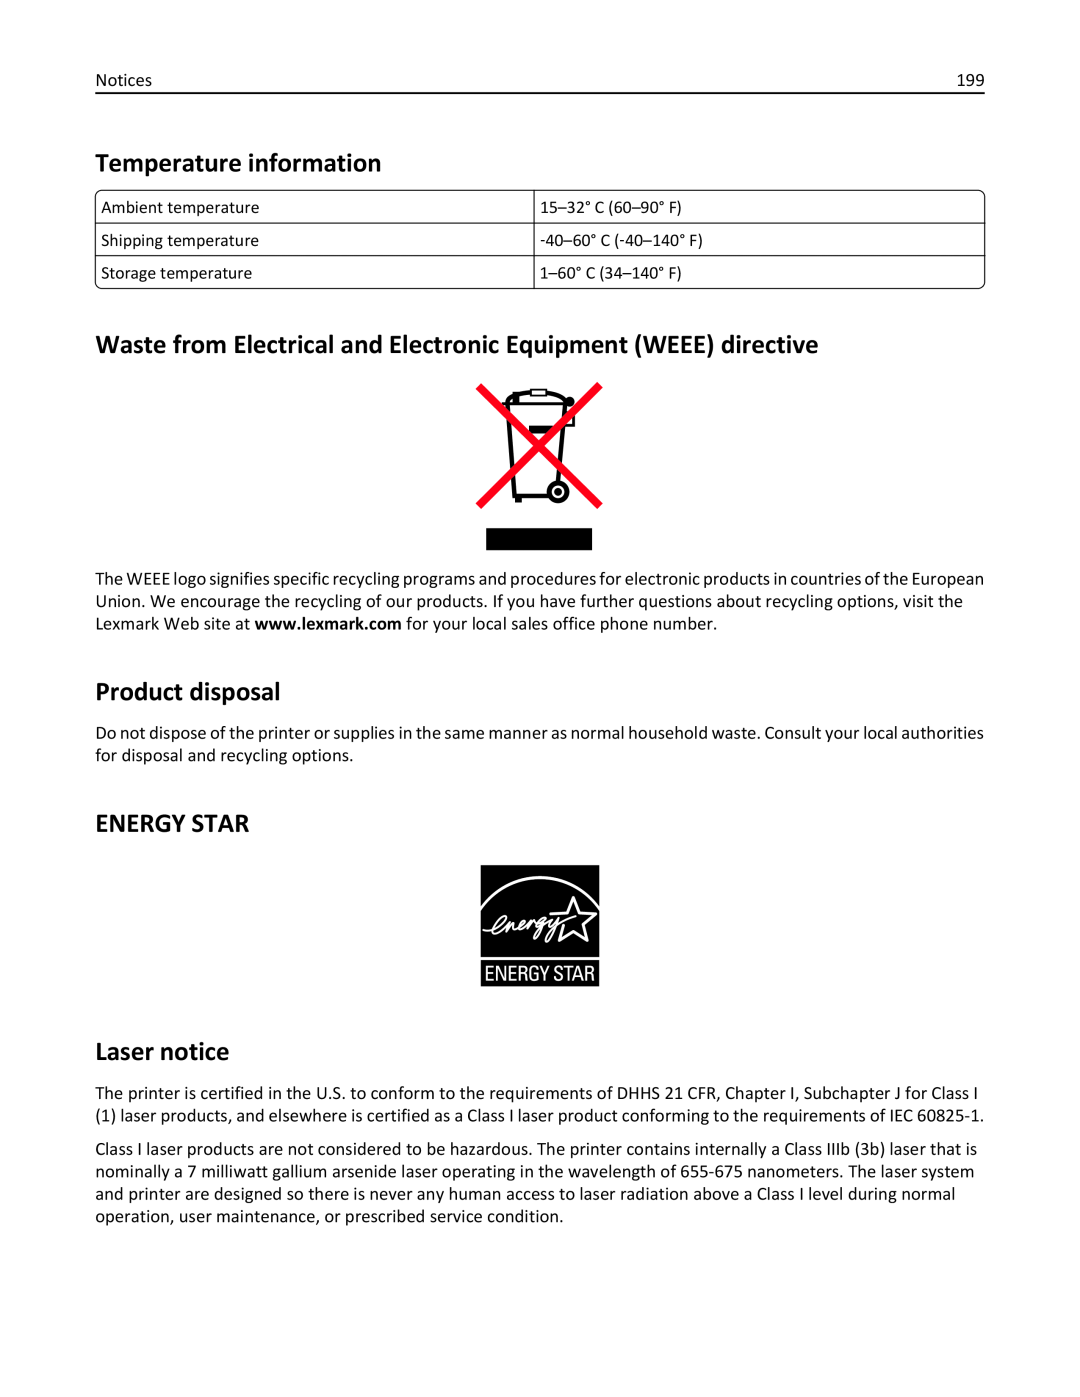 Lexmark W850DN Temperature information, Waste from Electrical and Electronic Equipment WEEE directive, Product disposal 